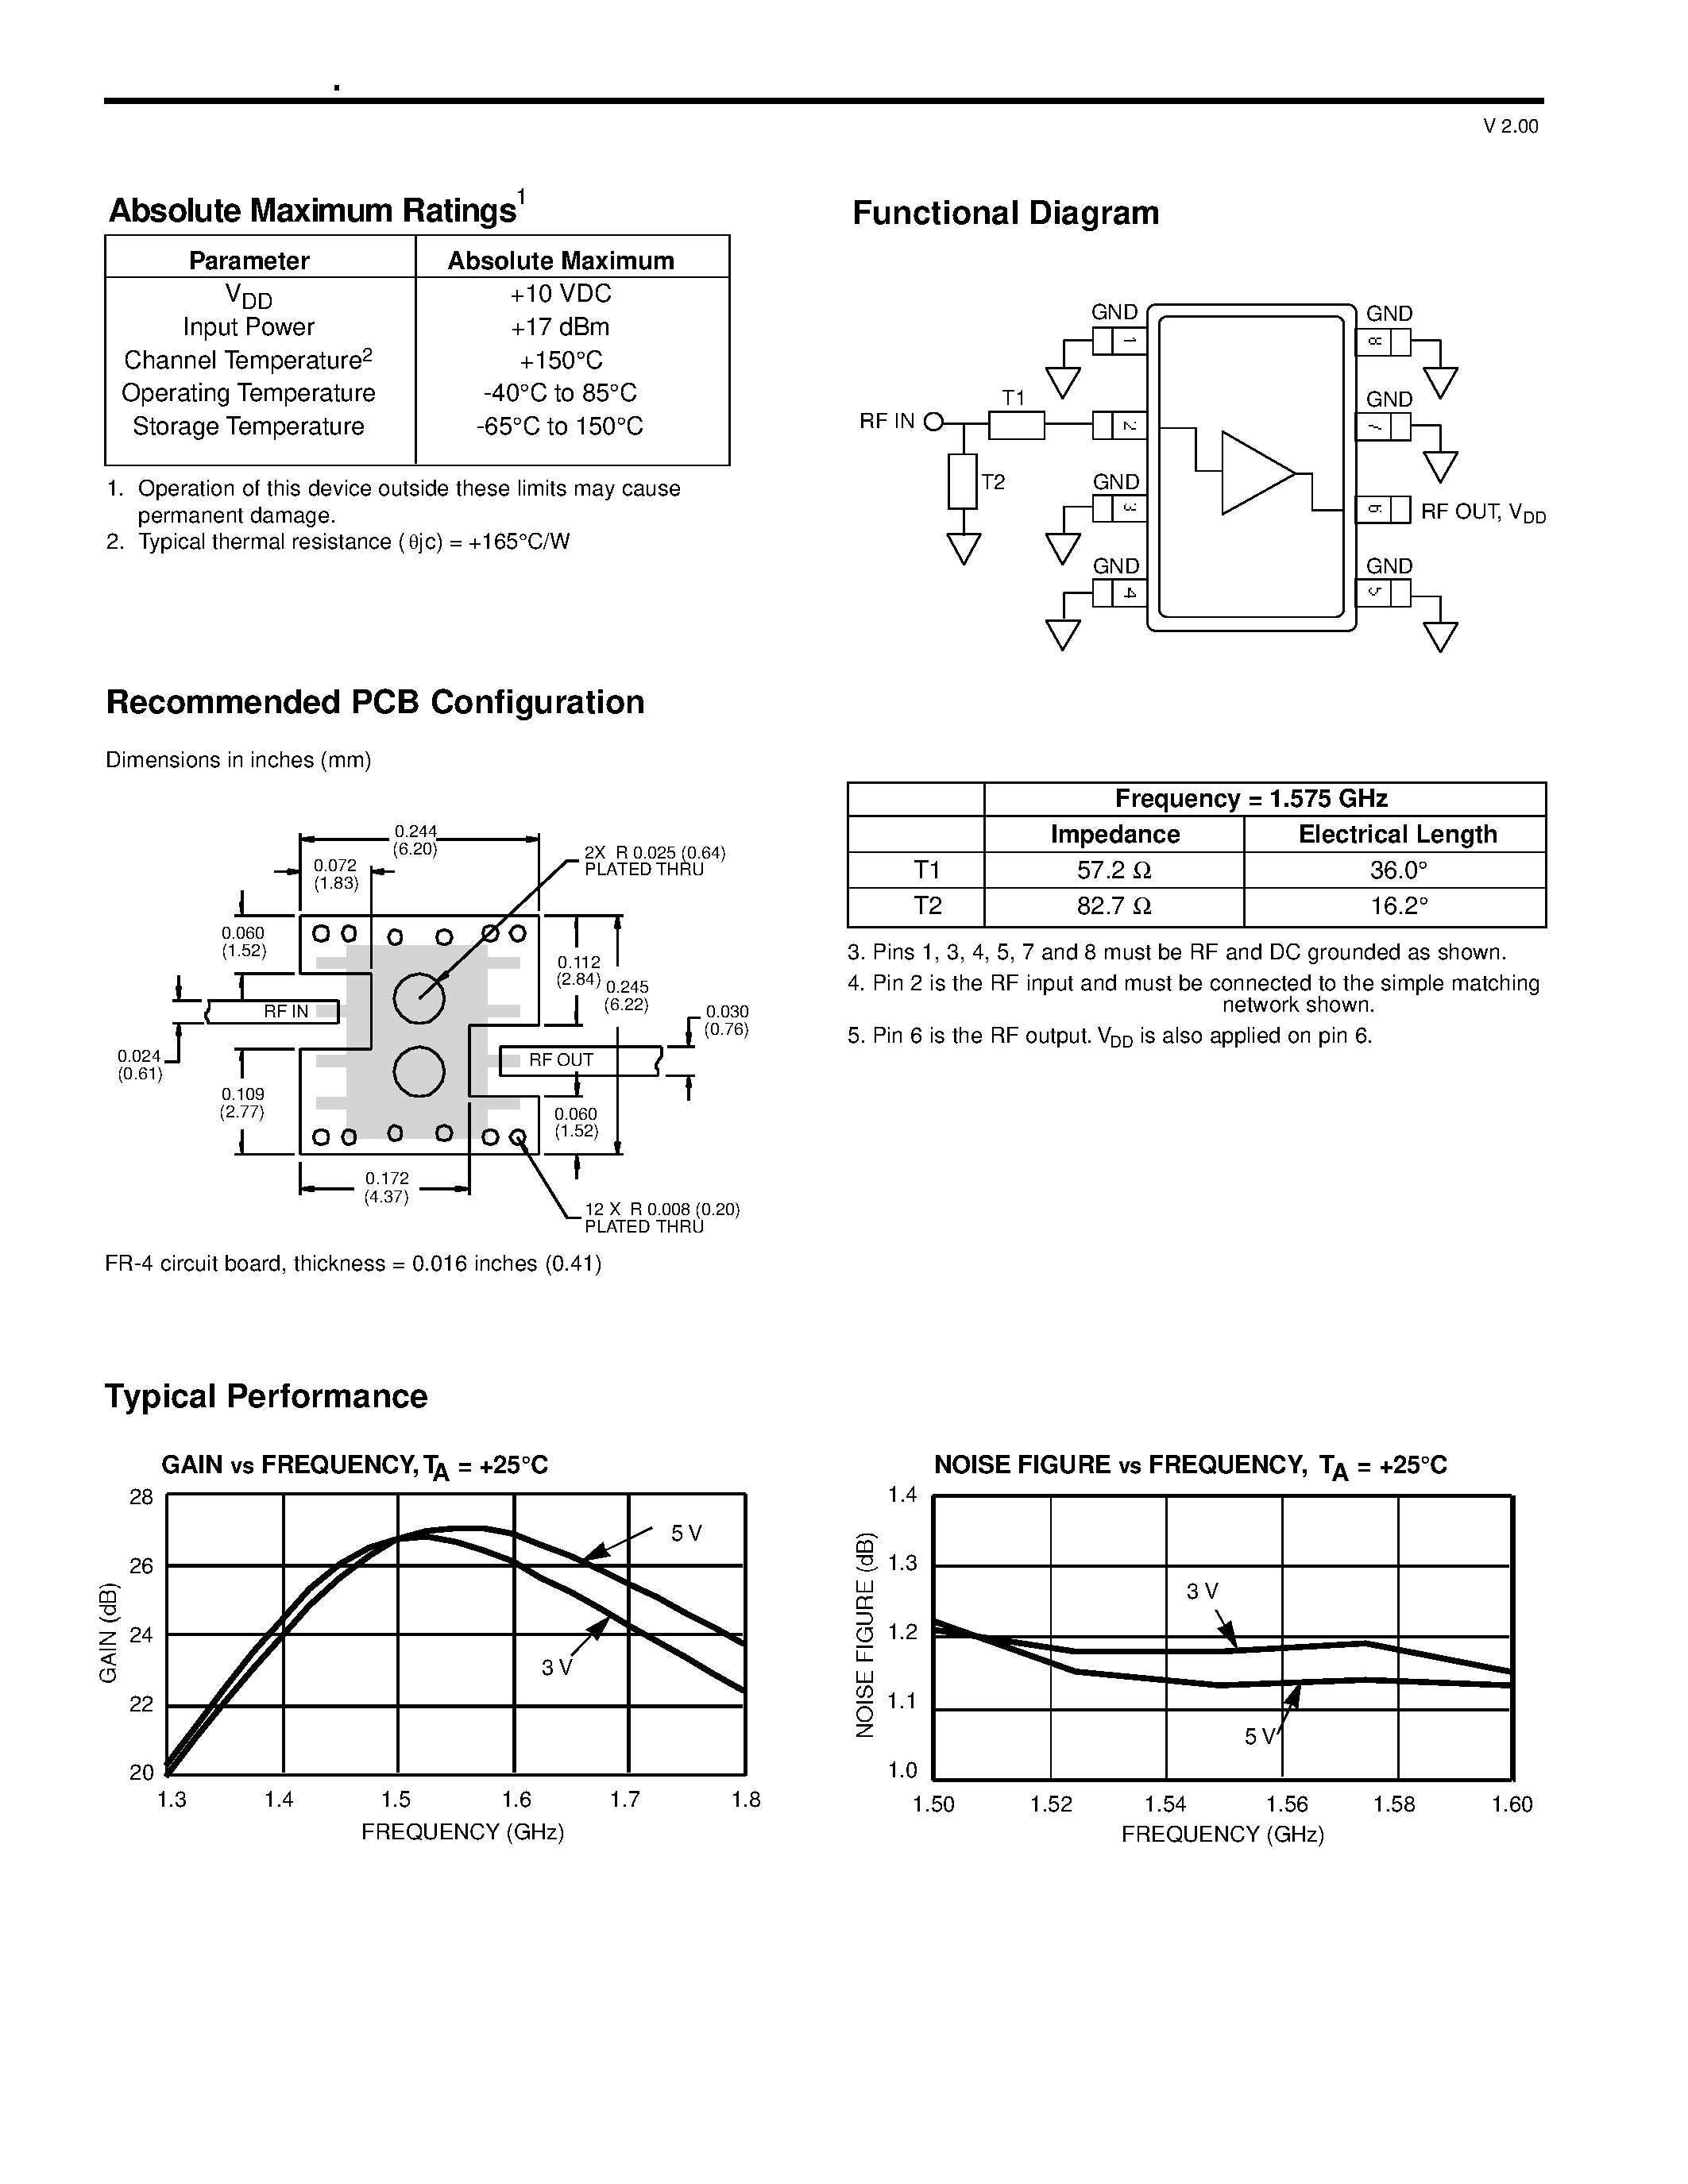 Datasheet AM50-0002RTR - Low Noise Amplifier 1.575 GHz page 2